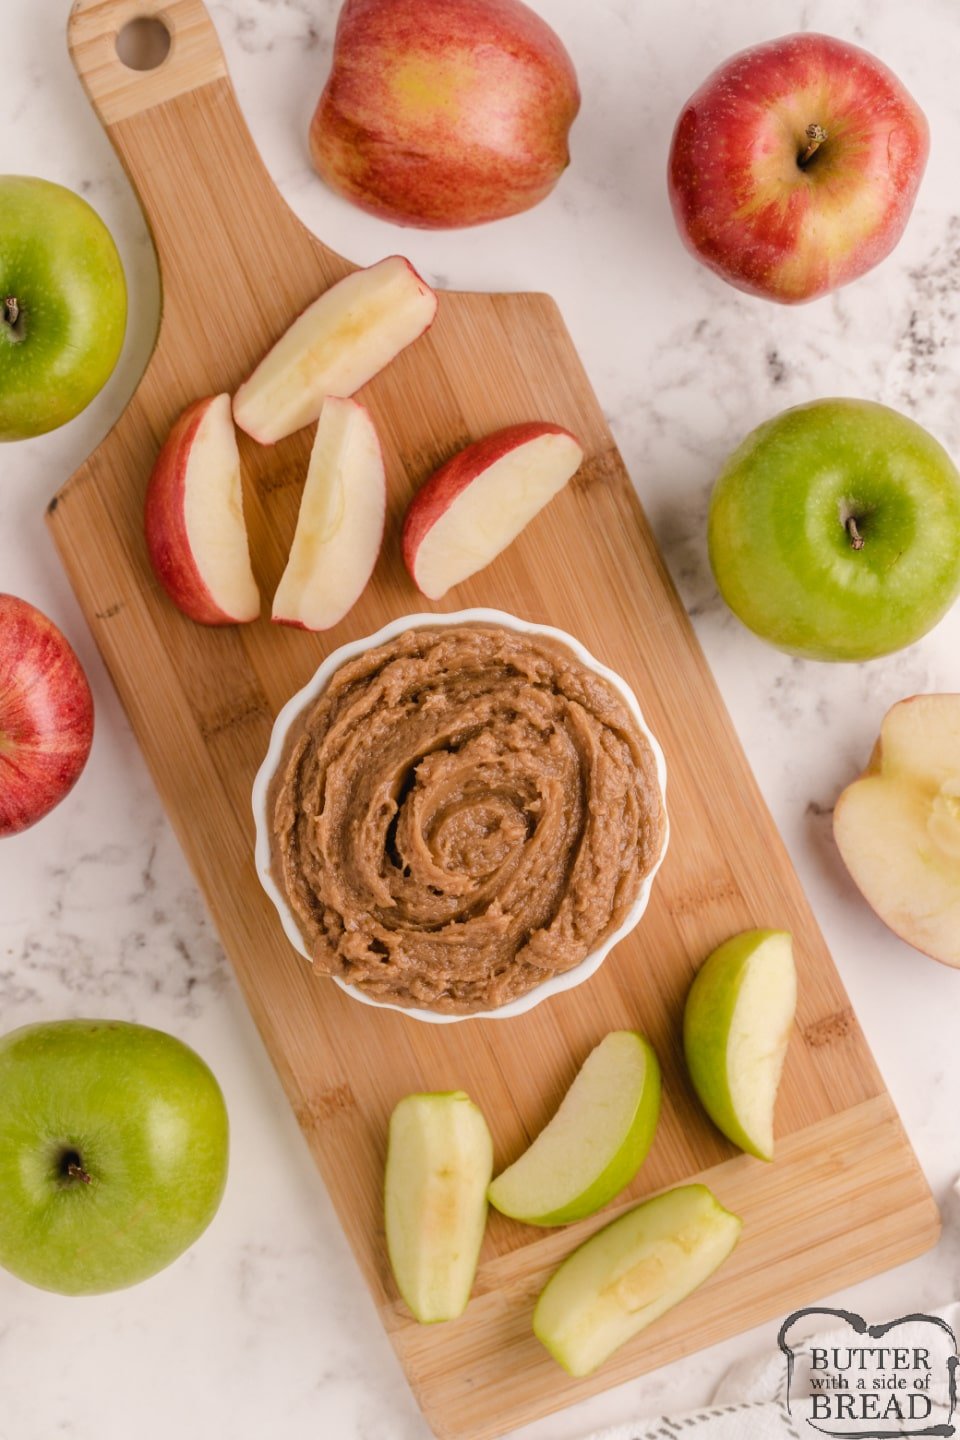 Apple dip made with peanut butter and cream cheese